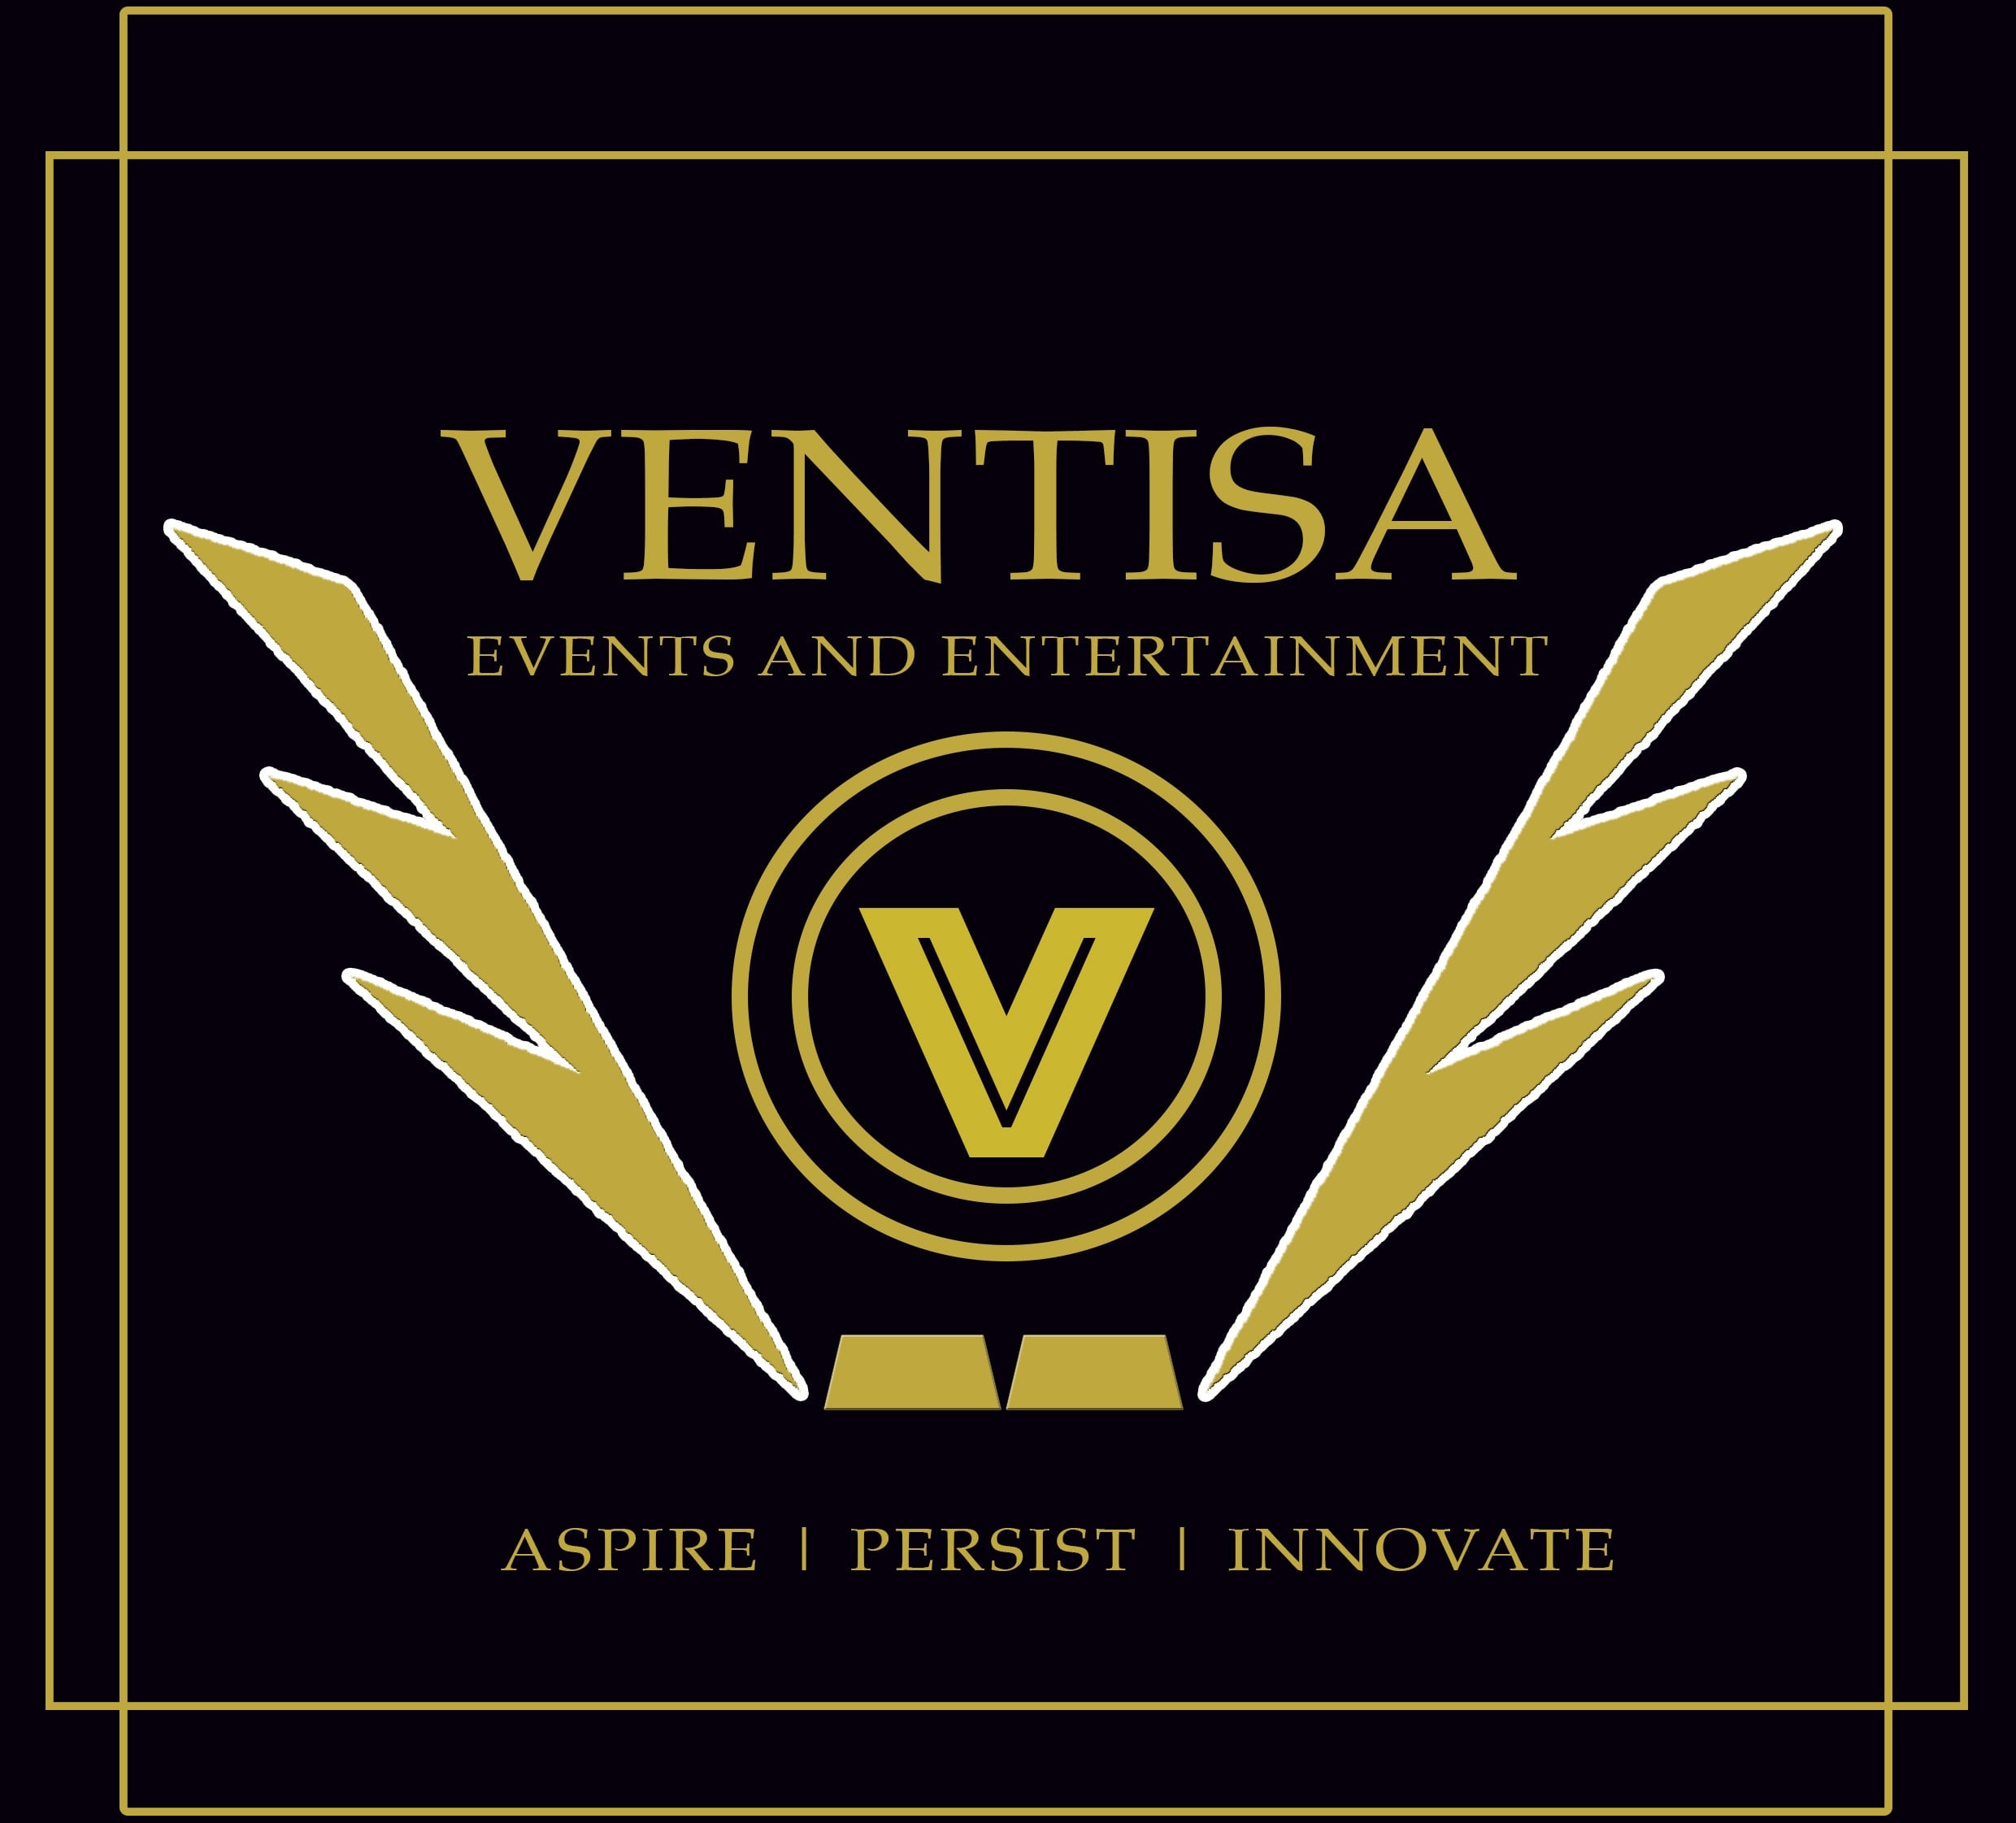 Ventisa Events and Entertainment